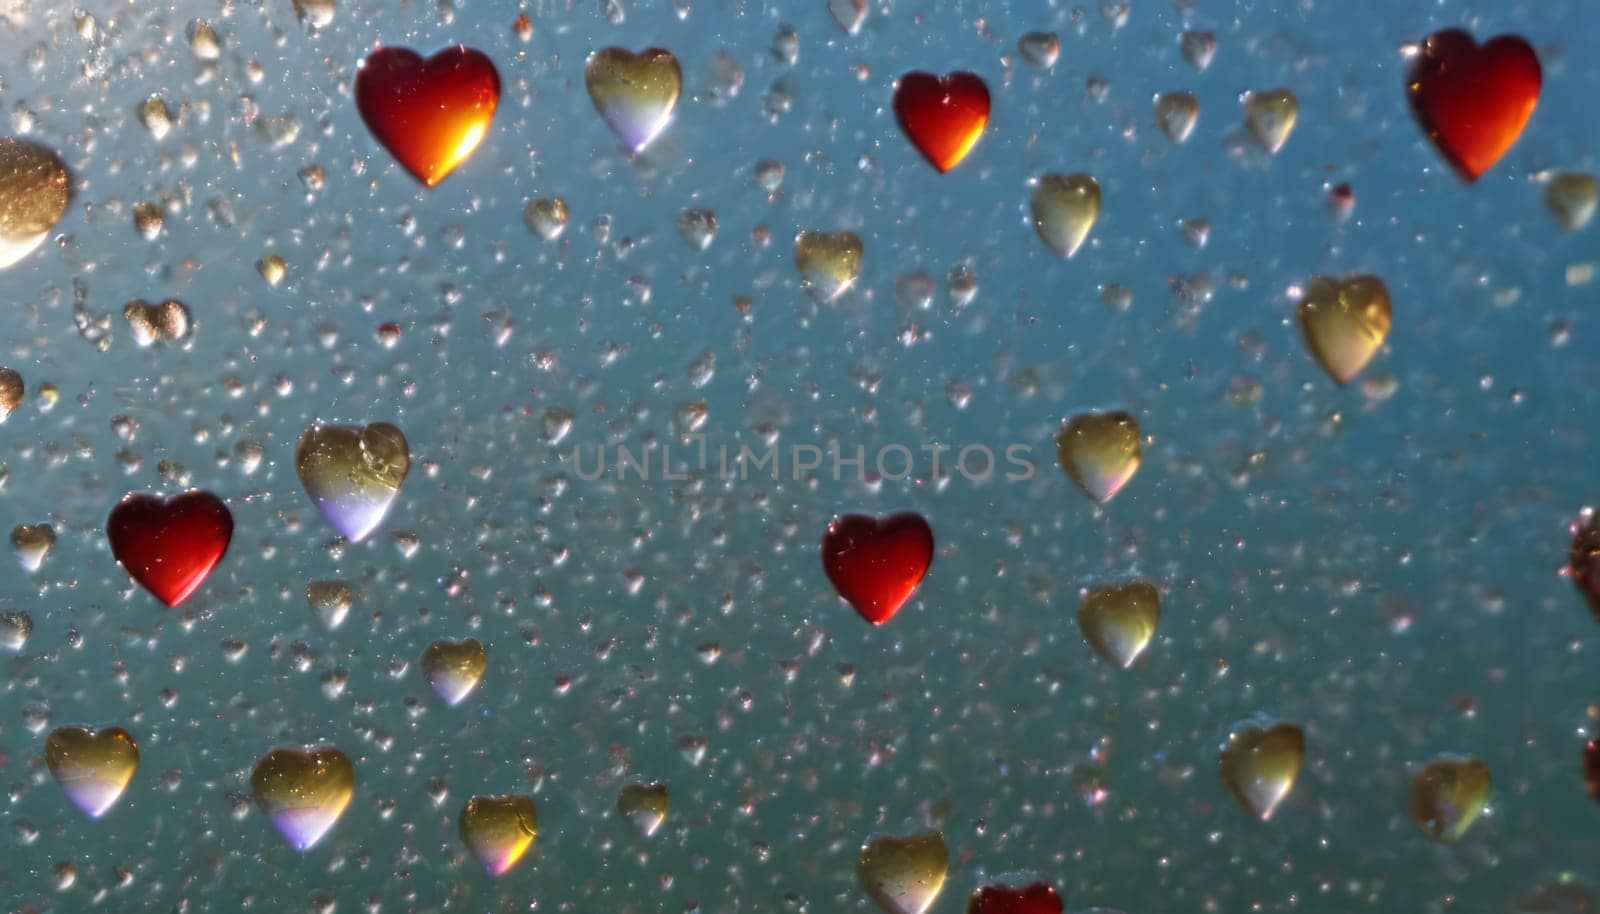 realistic detailed, abstract with a deep depth of field of different little ones sizes glass raindrops on glass in the shape of a heart, transparent colors of the rainbow glass hearts on abstract glass transparent background in perspective, lens flare, glints, translucent, transparent